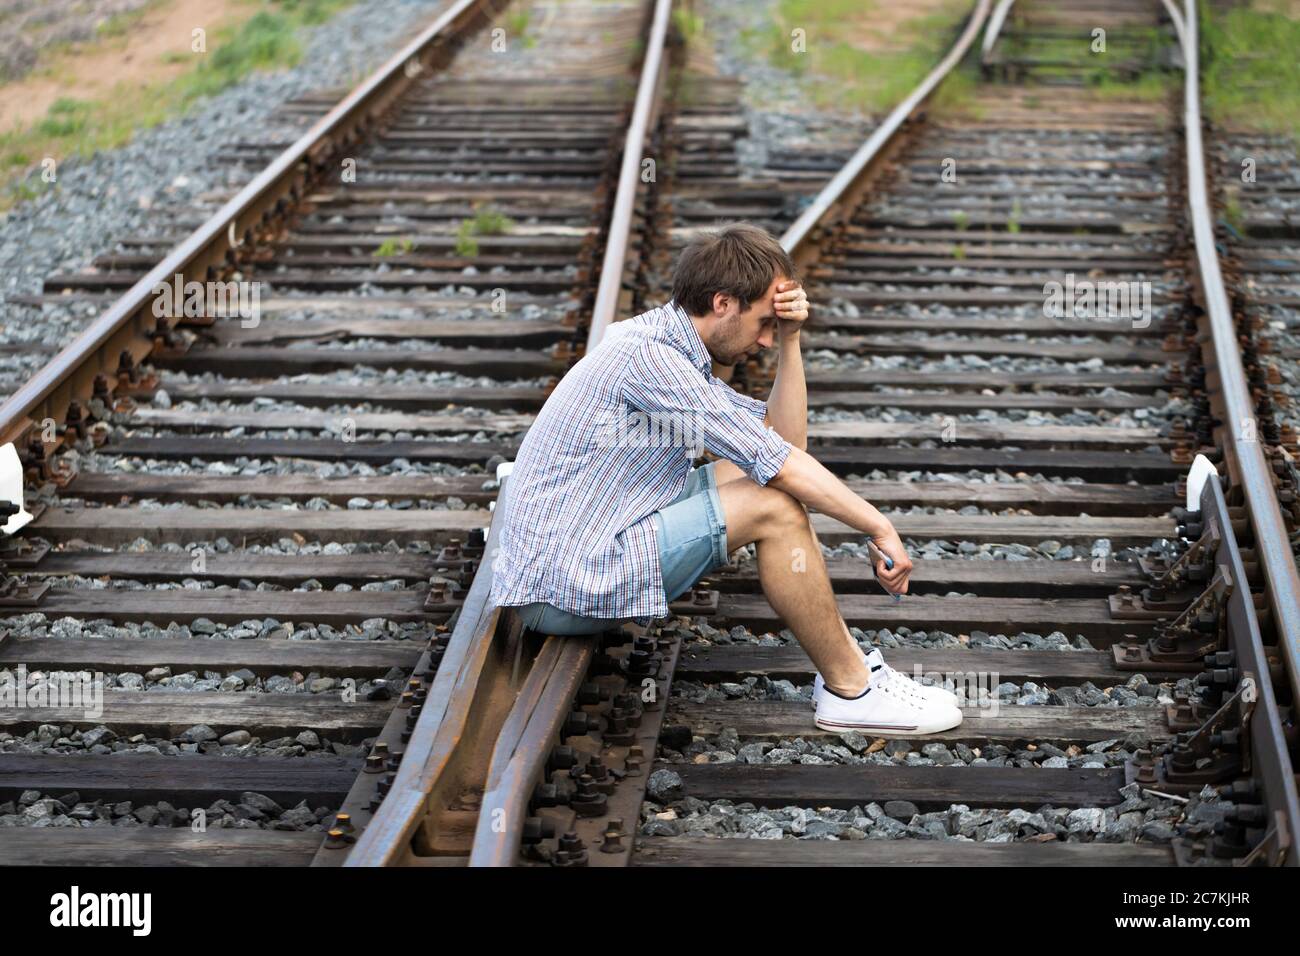 Depressed man sitting on the railroad tracks, holding phone, makes a difficult decision to live in the past or change his future. Changing life path c Stock Photo